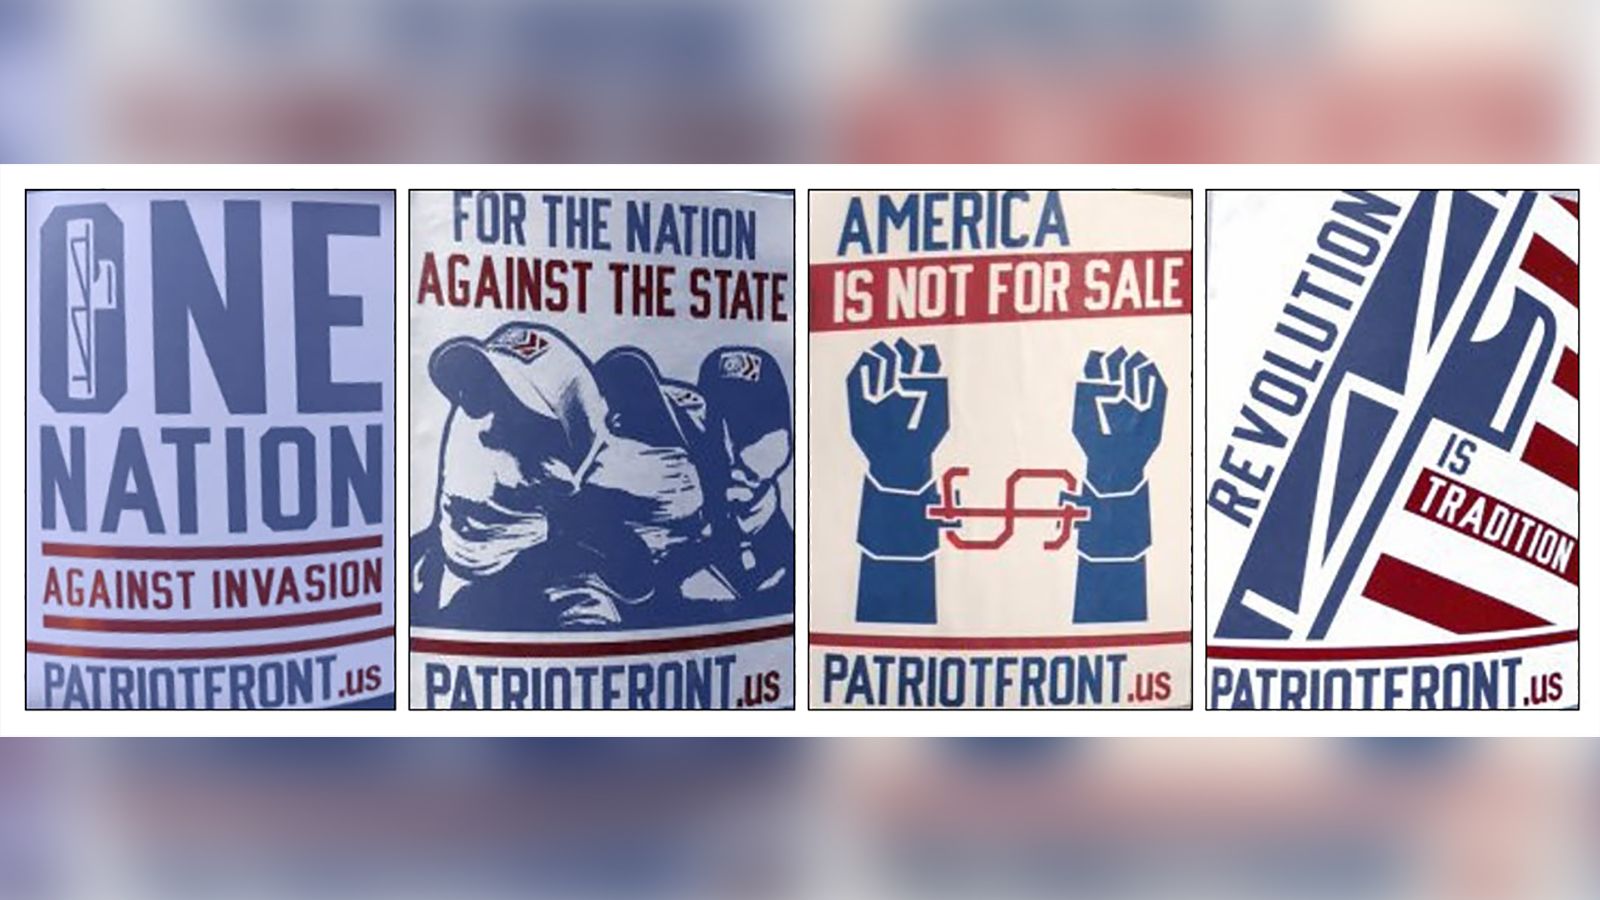 The ADL says the Patriot Front group uses a red, white and blue color scheme to promote its white supremacist ideology.